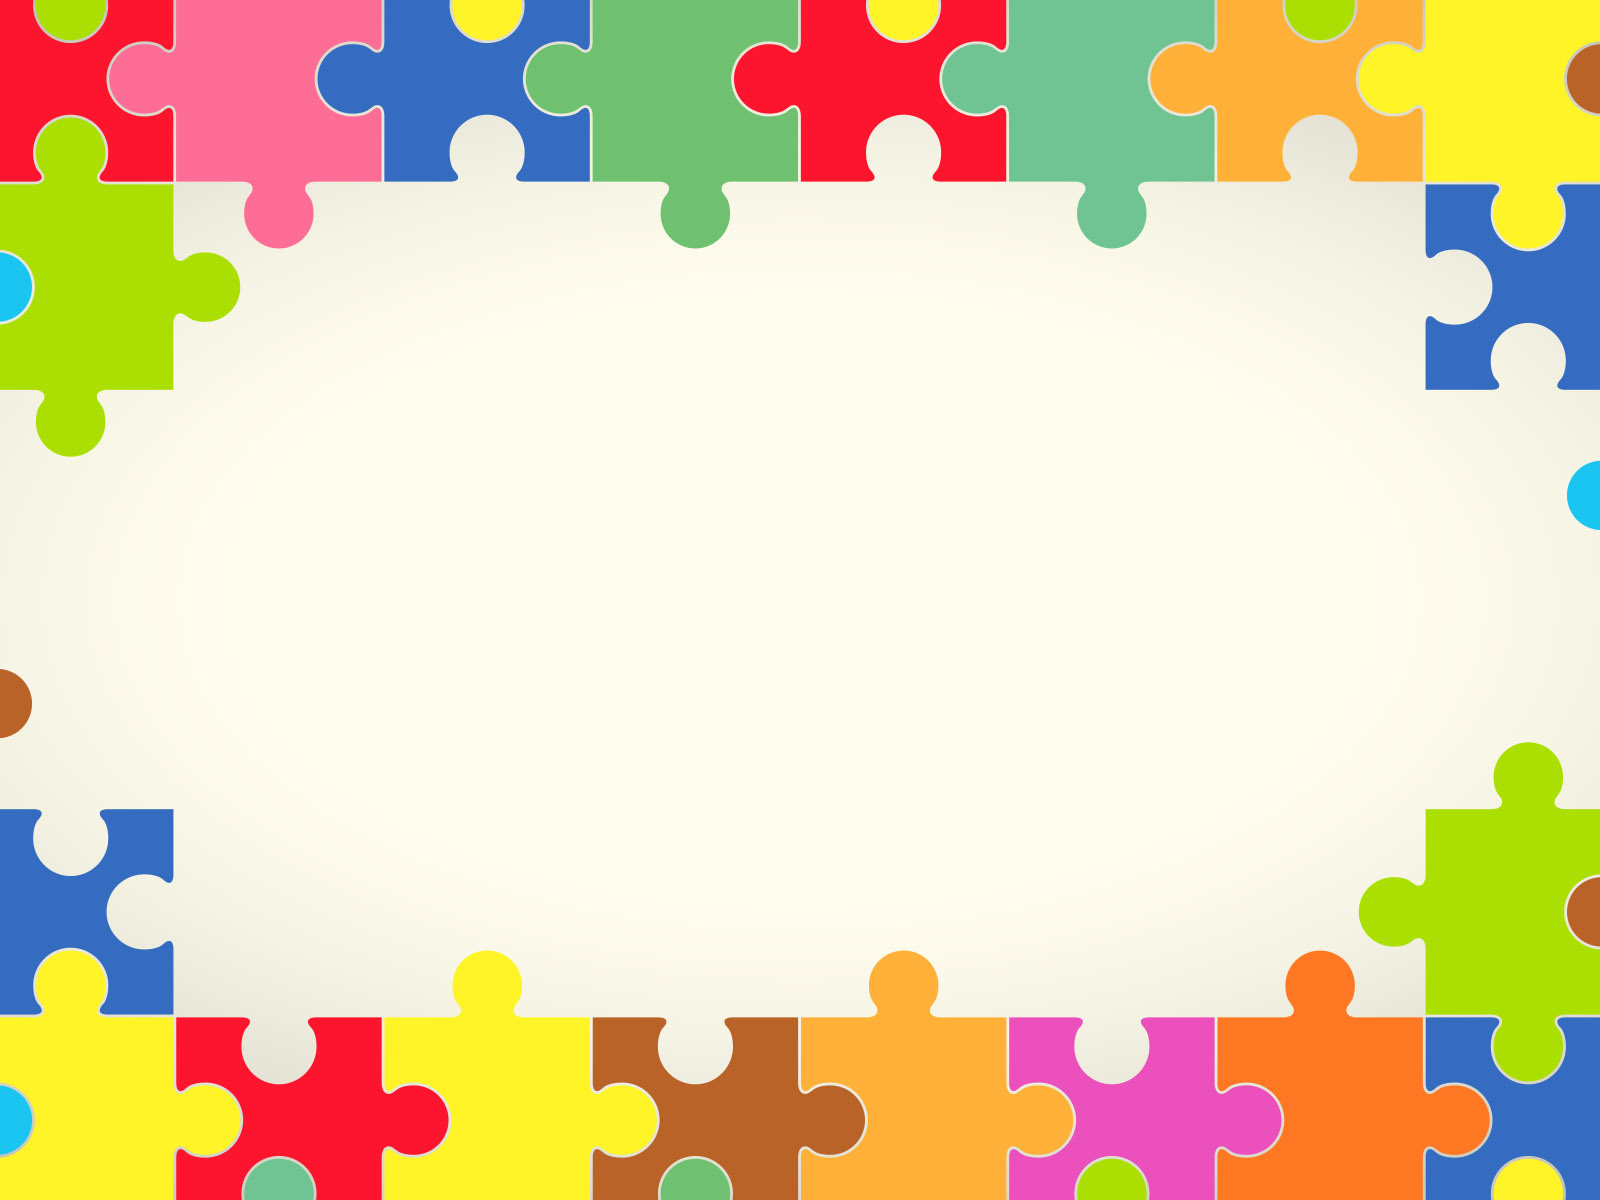 Colourful Puzzles Powerpoint Templates Border & Frames, Objects